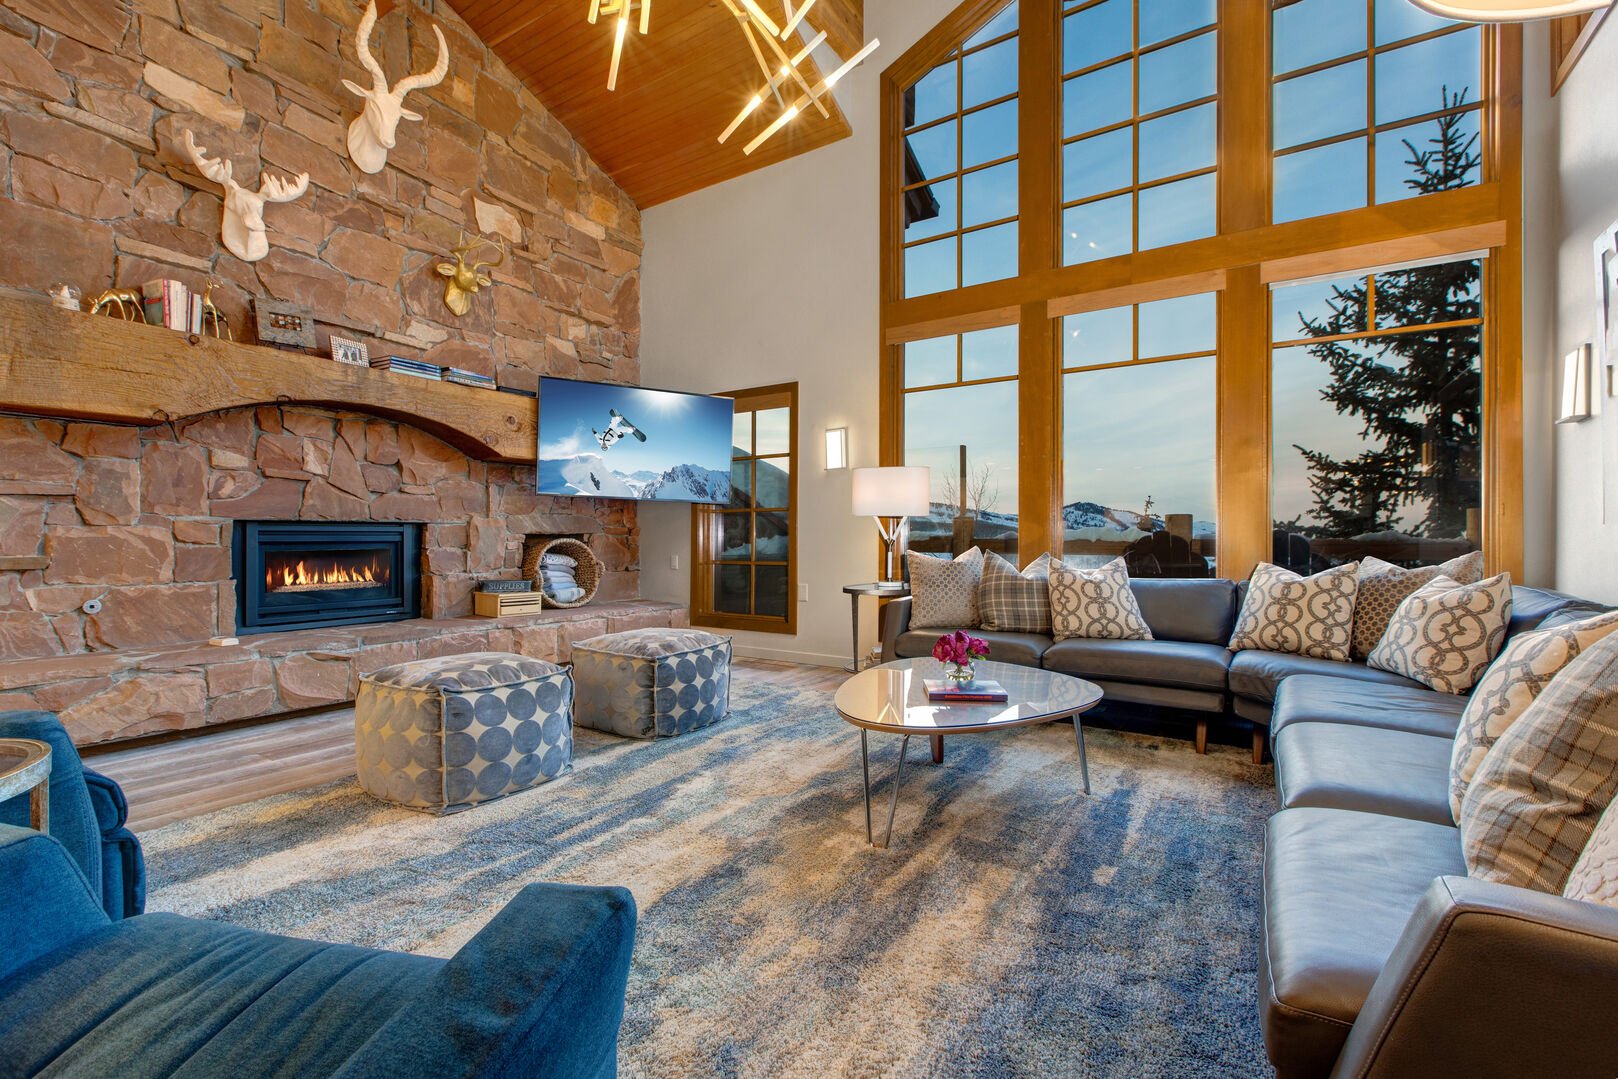 Abode at Stag Lodge | Main Level includes living area, dining, kitchen, laundry, and private balcony with gas grill & hot tub overlooking Deer Valley & Park City